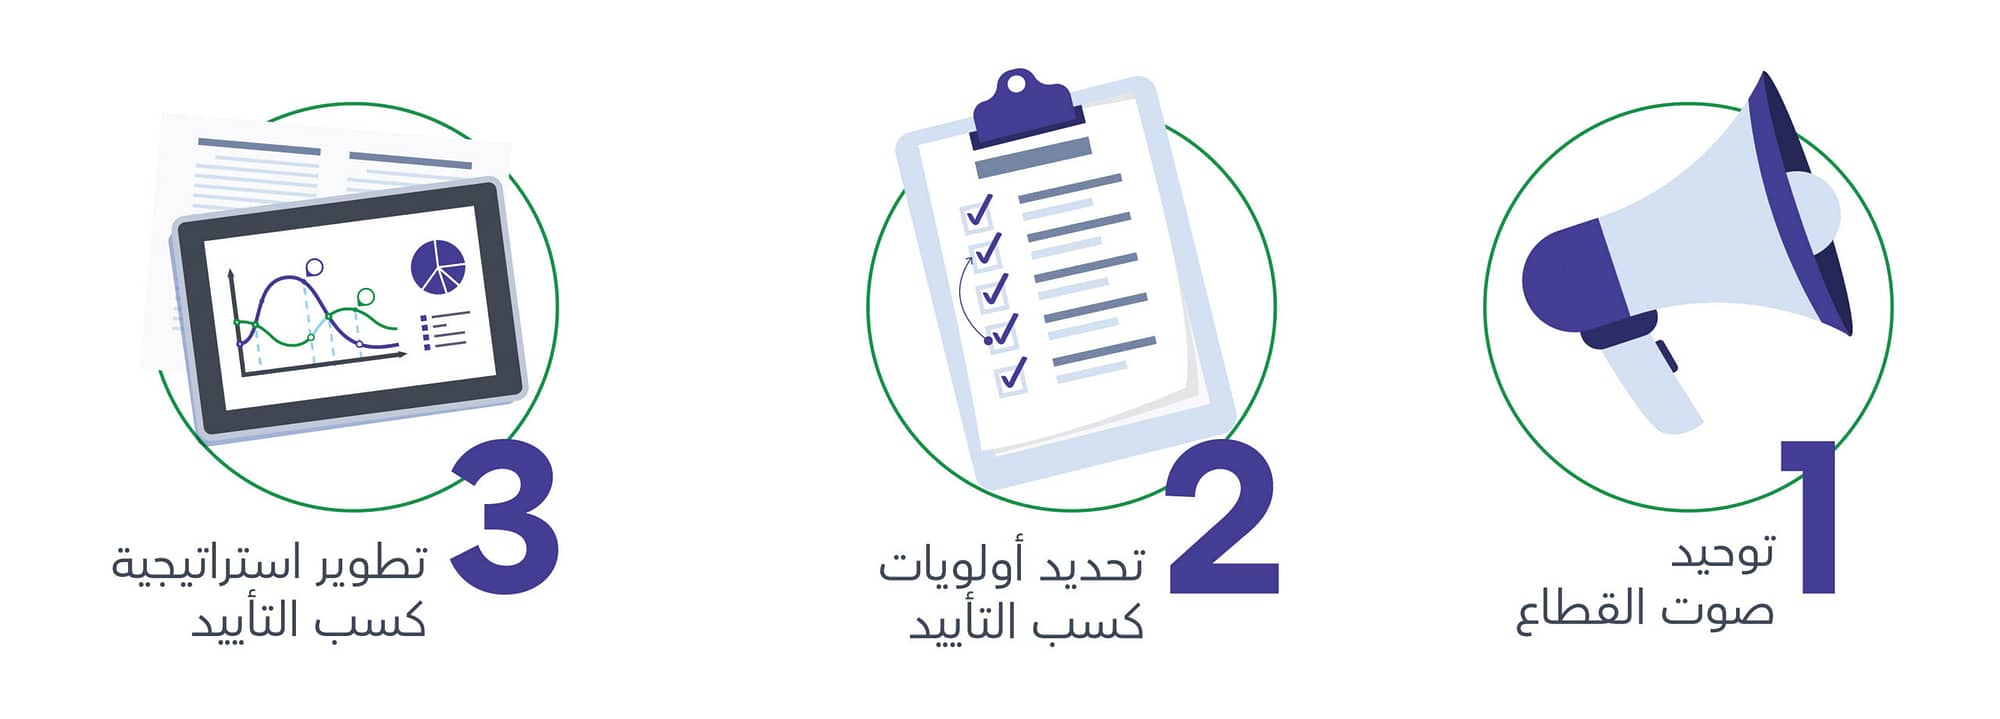 Operating Association stages Arabic